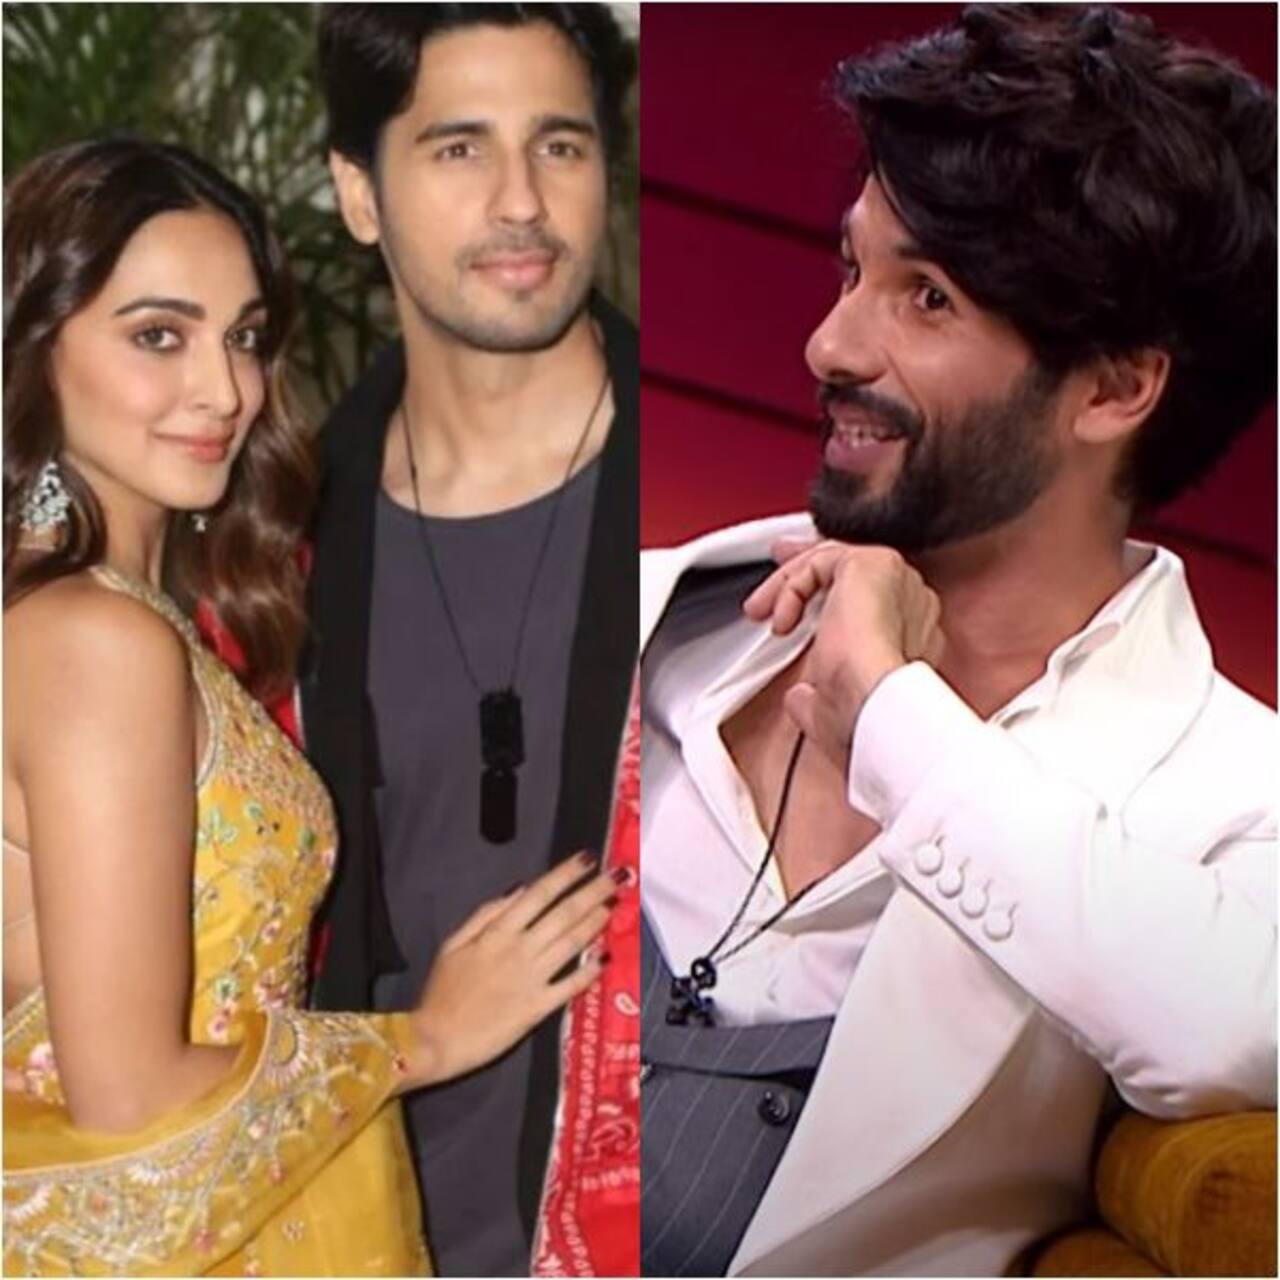 Koffee With Karan 7 new promo: Sidharth Malhotra and Kiara Advani to get married by the end of this year? Shahid Kapoor says 'Be ready for BIG announcement' [Watch Video]